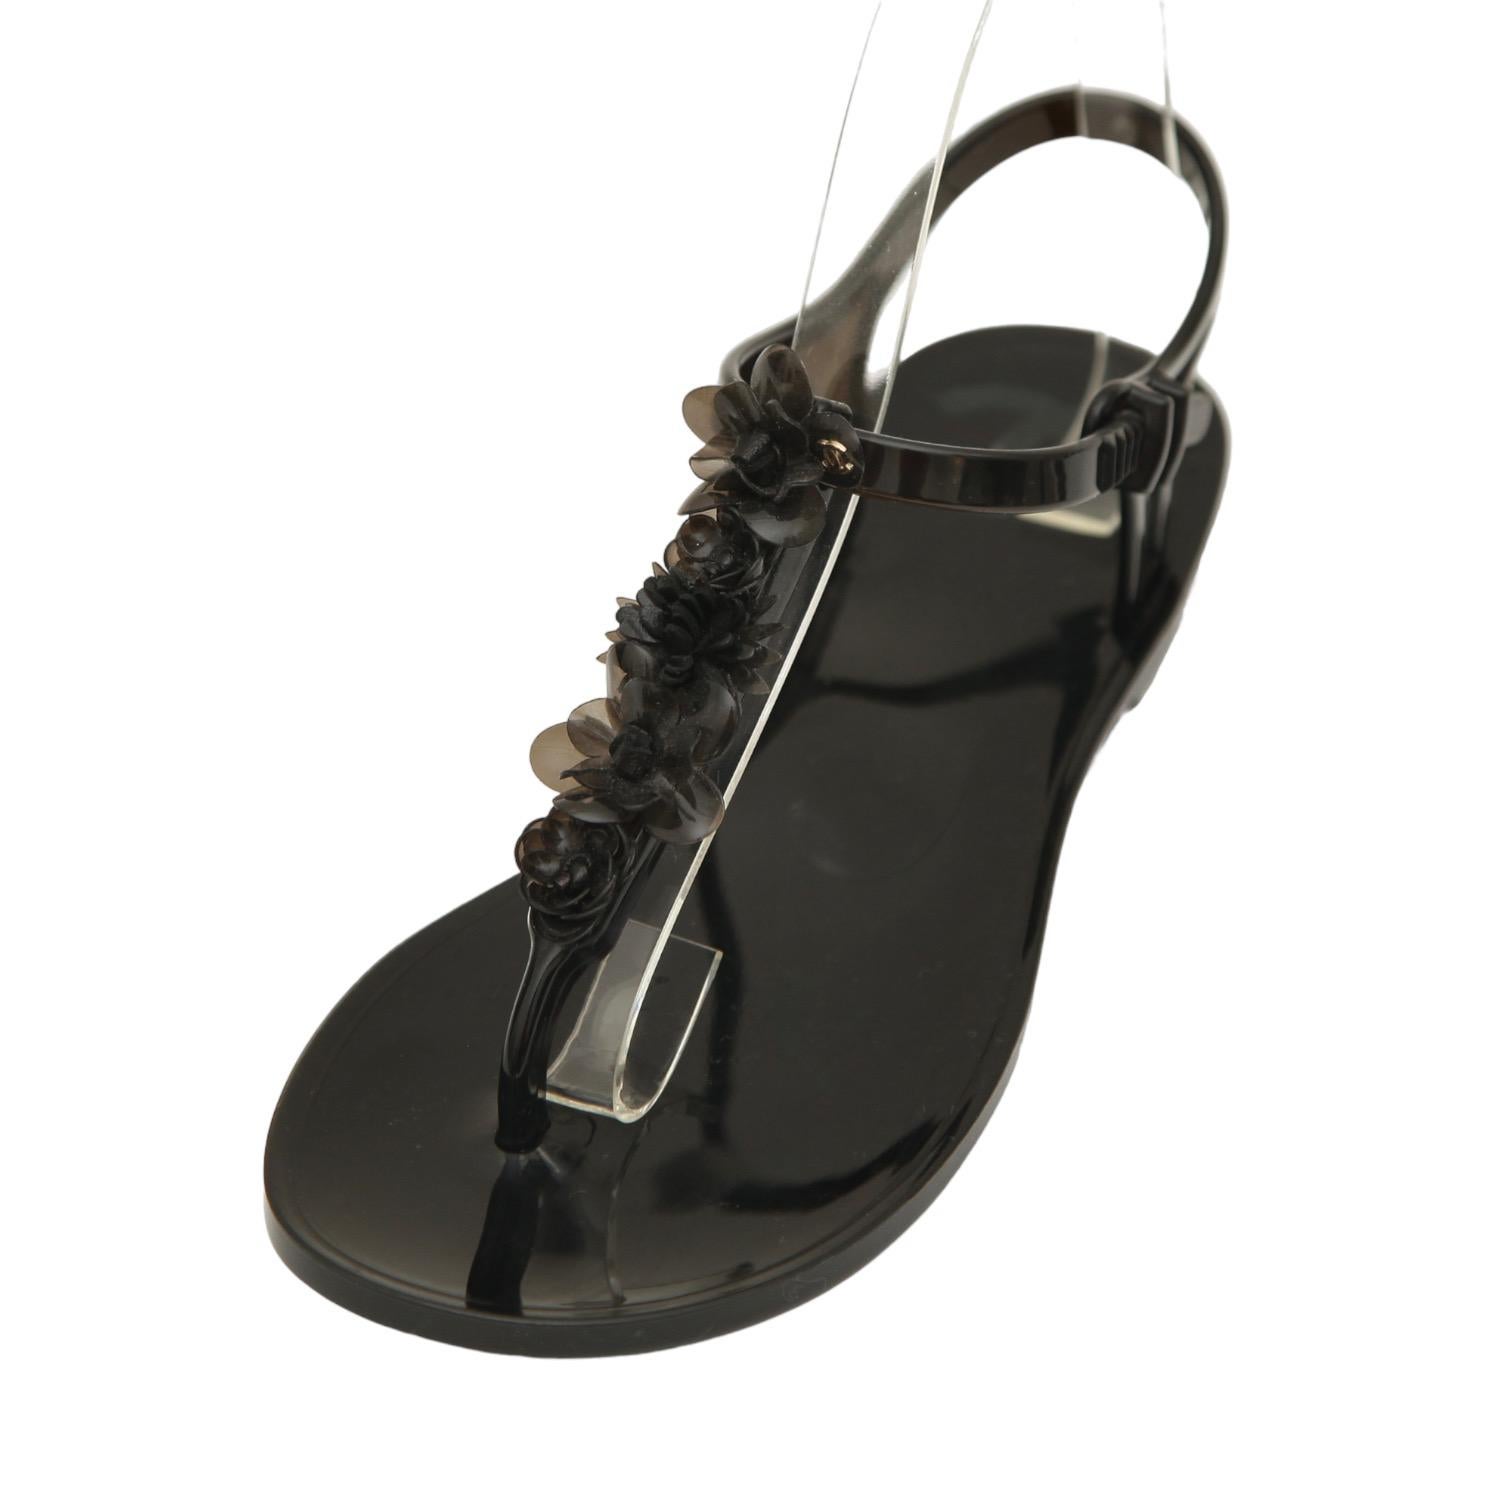 CHANEL Sandal Camellia Jelly Black Thong Rubber Gold CC Leather Sz 38 2016 In Good Condition For Sale In Hollywood, FL